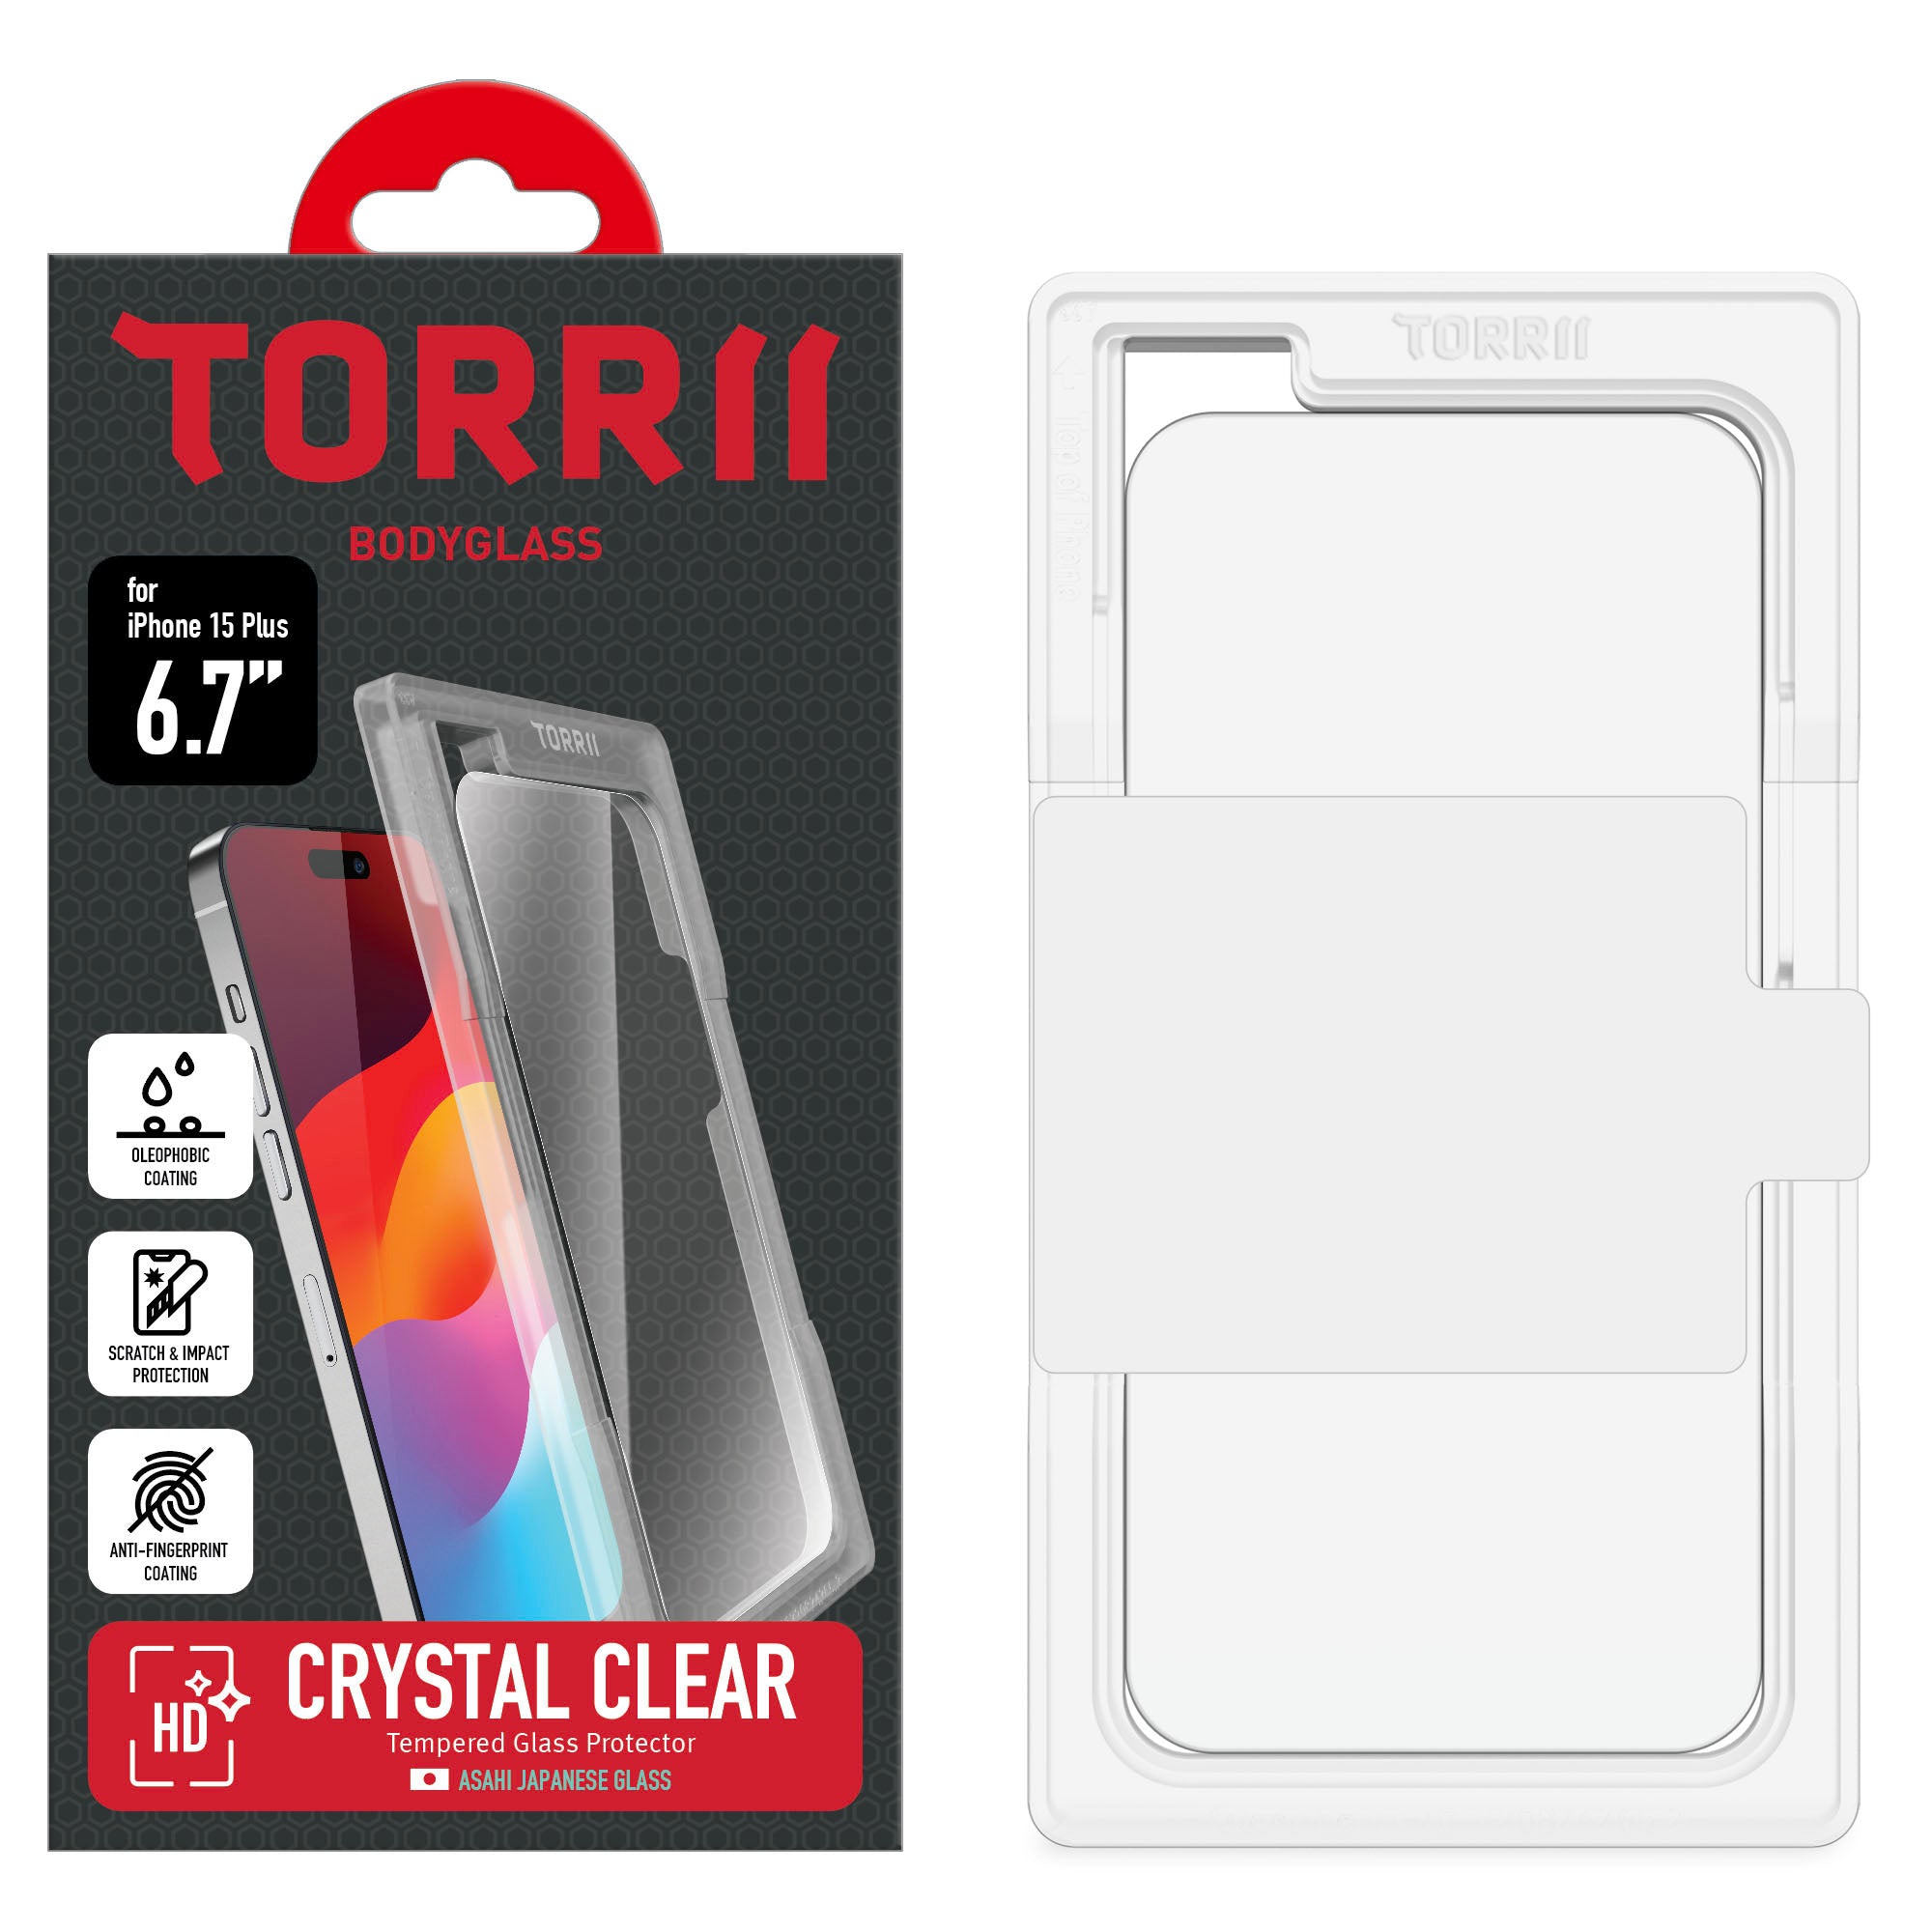 Torrii Bodyglass Screen Protector For iPhone 15 Plus – Clear